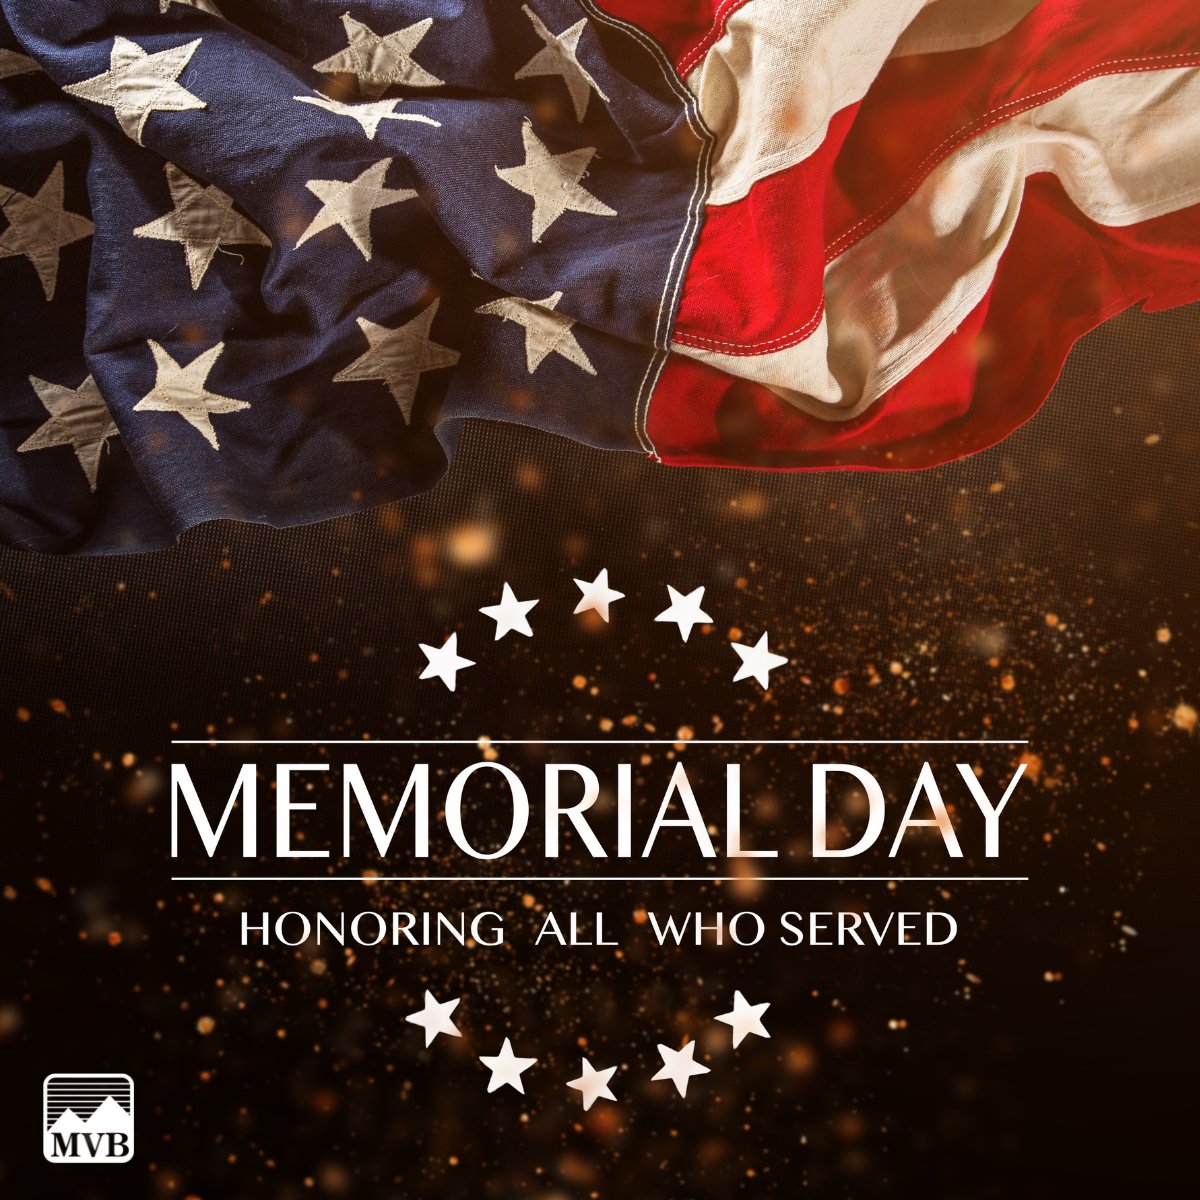 Today we honor those who gave their lives while protecting the lives of others throughout the world. 
 #MemorialDay #HonorOurHeroes #ServiceAndSacrifice #HonorAndRemember #MemorialDayWeekend
(MVB Bank, Member FDIC)